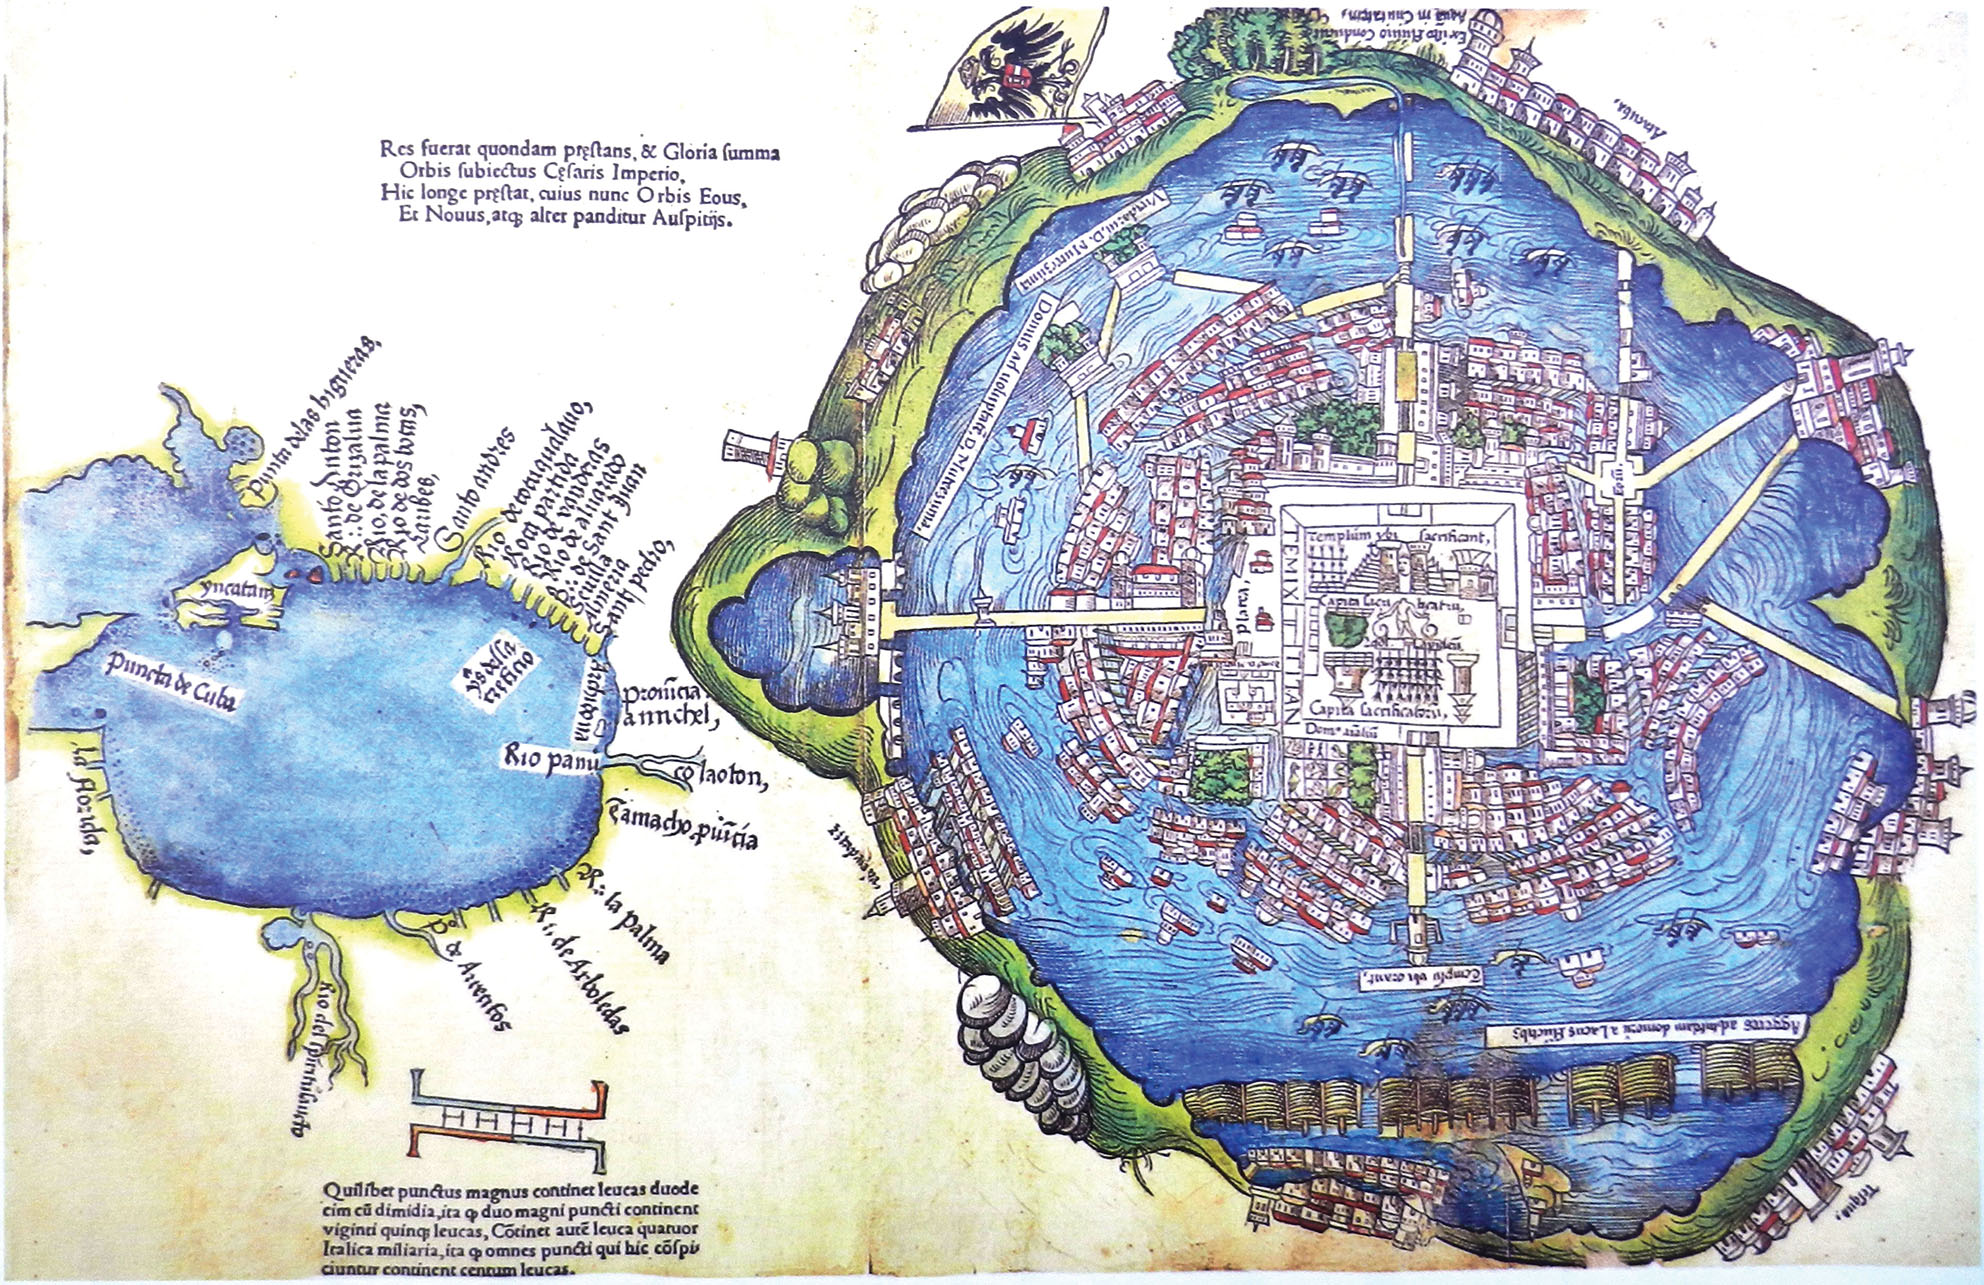 An old map of Tenochtitlán, site of Mexico City, shows Lake Texcoco surrounding the city. (Photo by Travis S.)